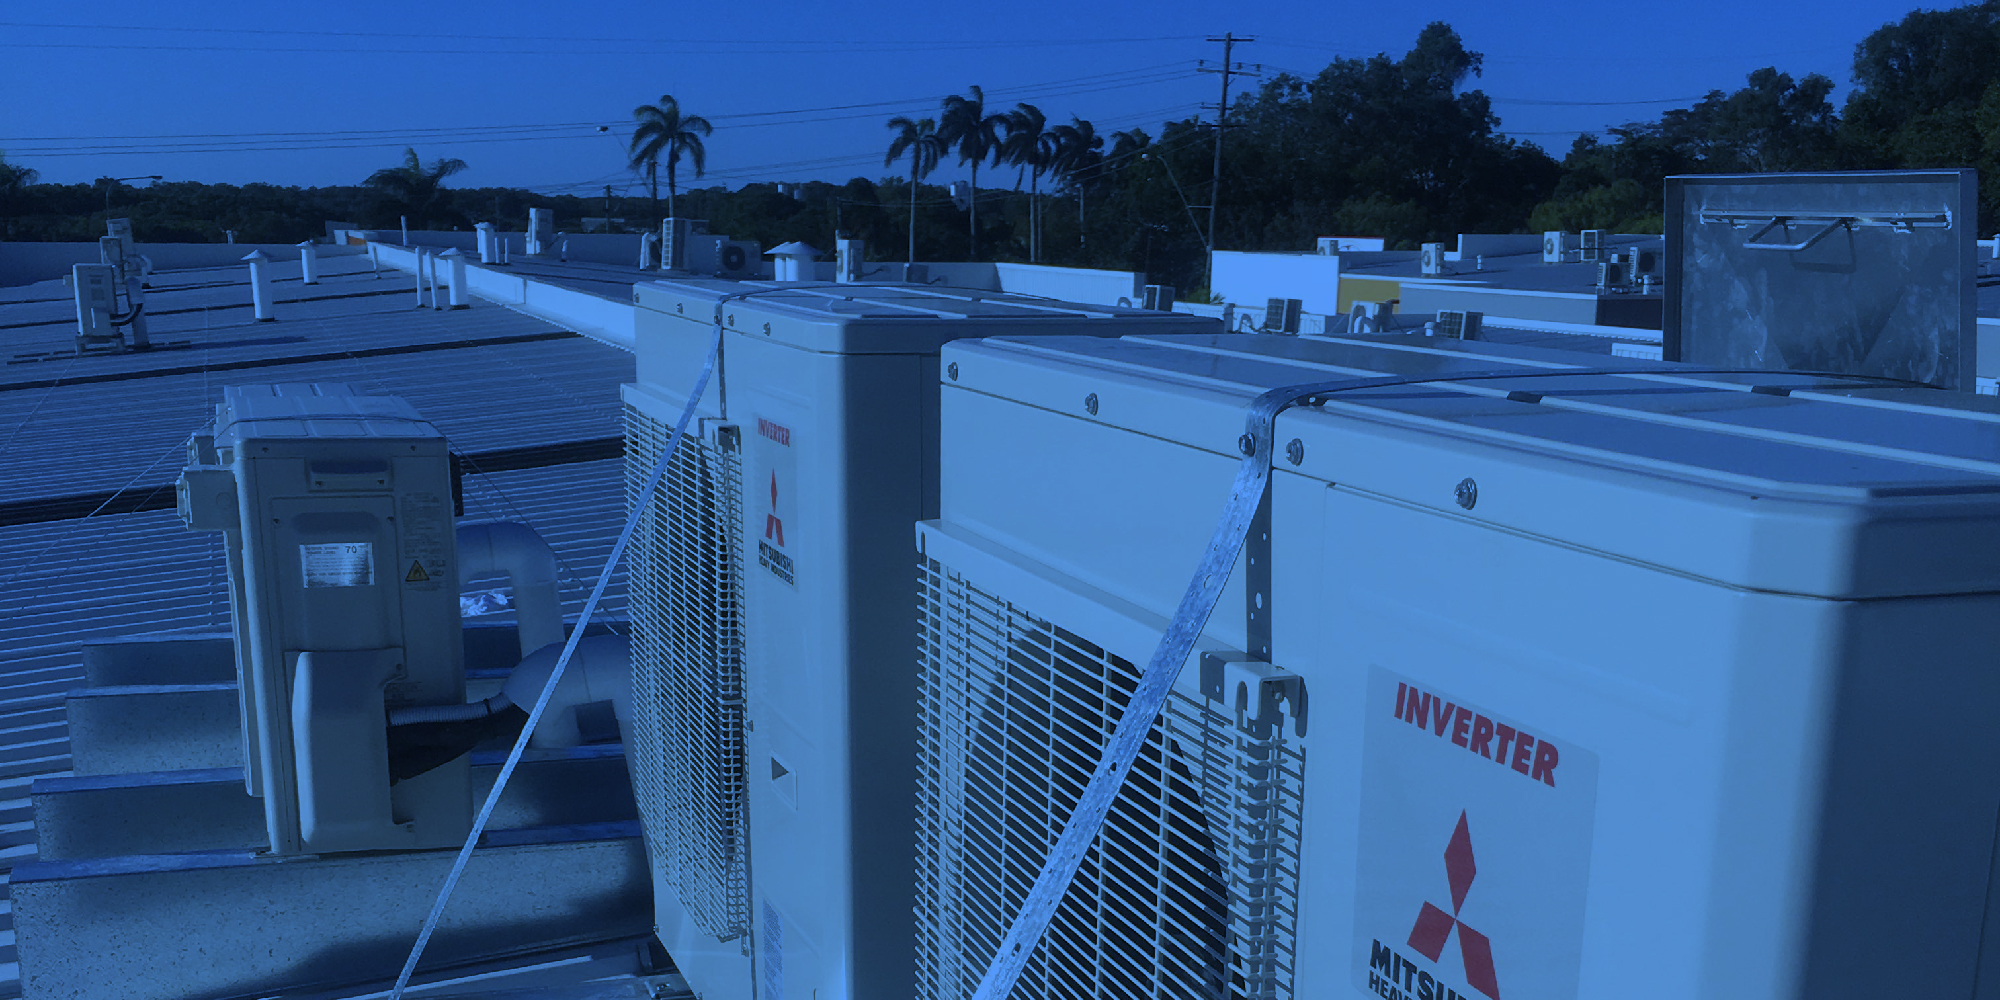   Chapman Air  providing 24-hour breakdown support of commercial air conditioning and refrigeration systems. 